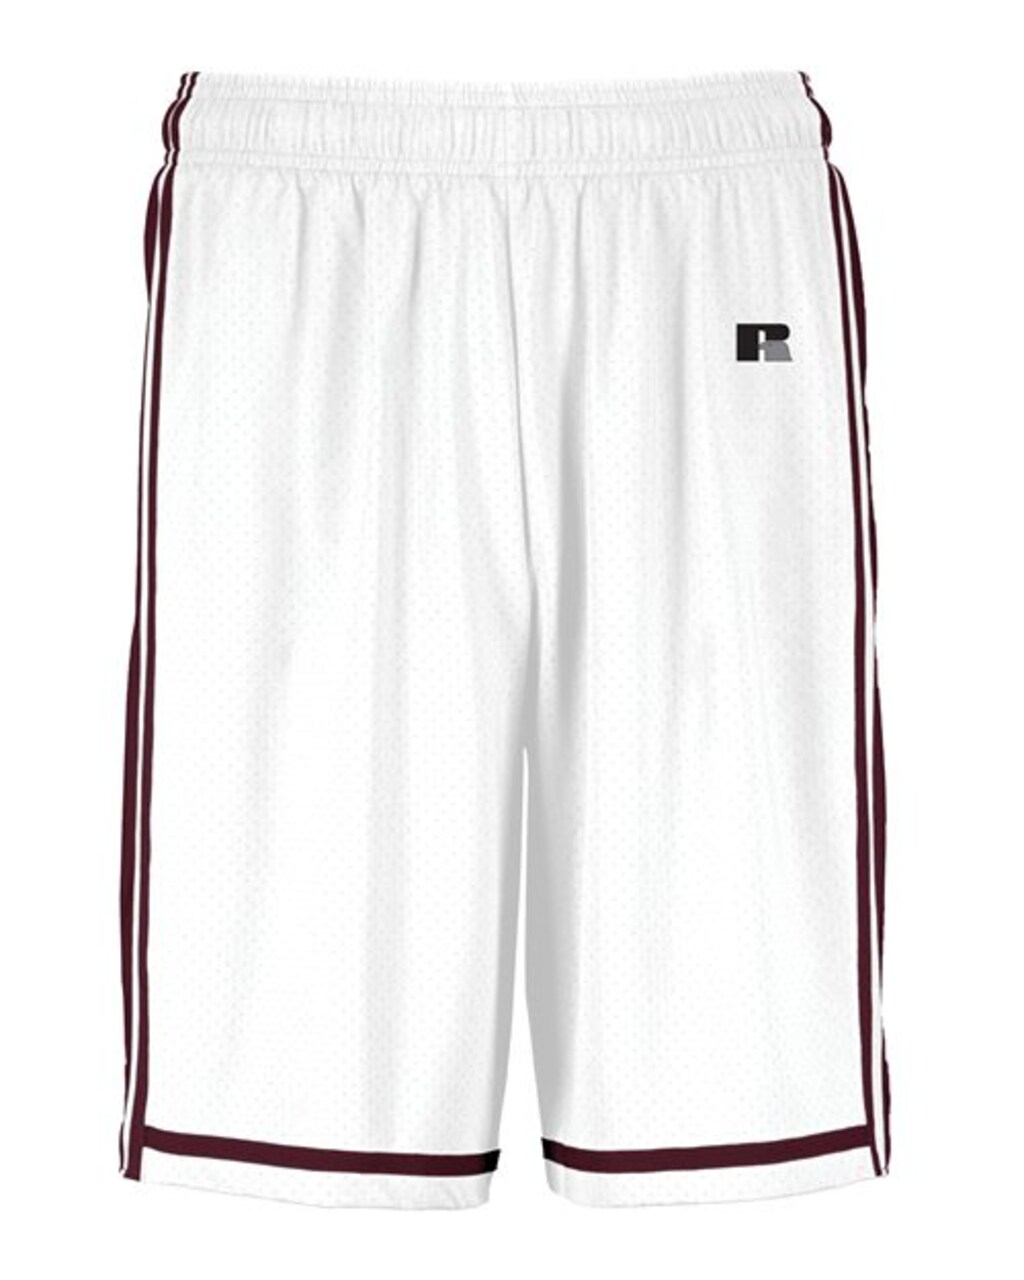 Russell Athletic - Youth Basketball Shorts | 92/8 nylon/spandex |Browse ...